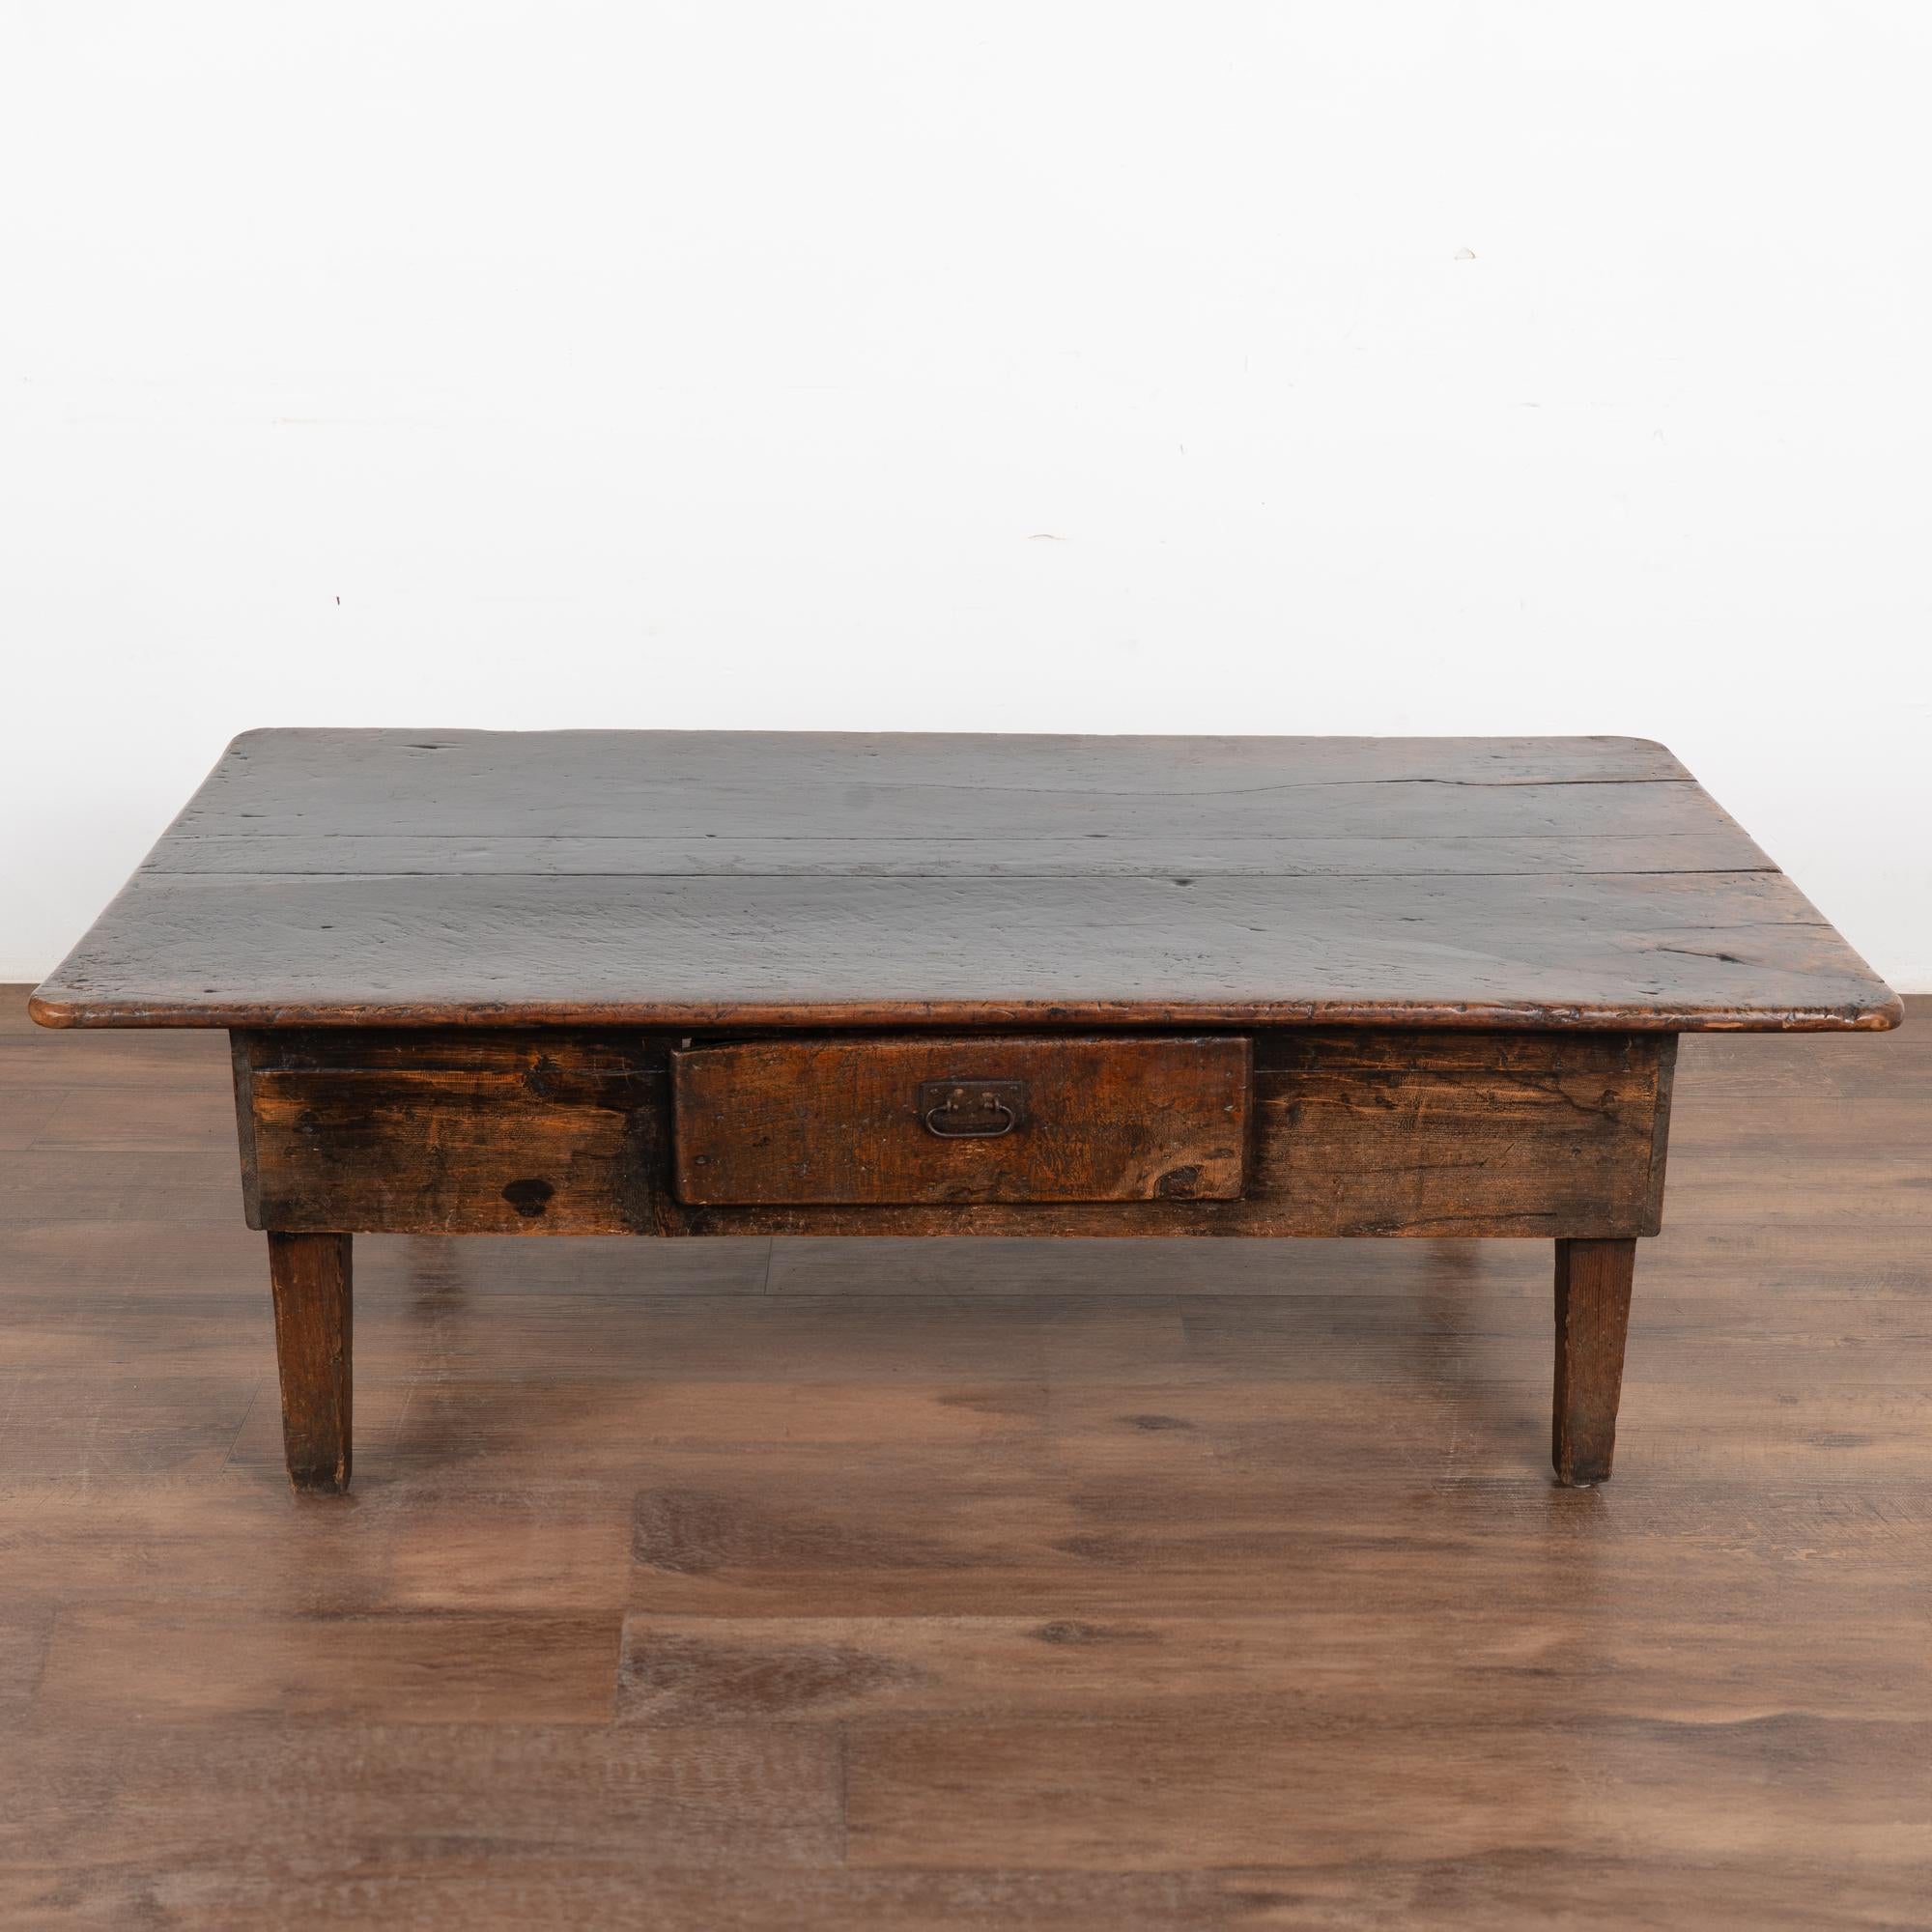 19th Century French Country Coffee Table With Single Drawer, Circa 1800-40